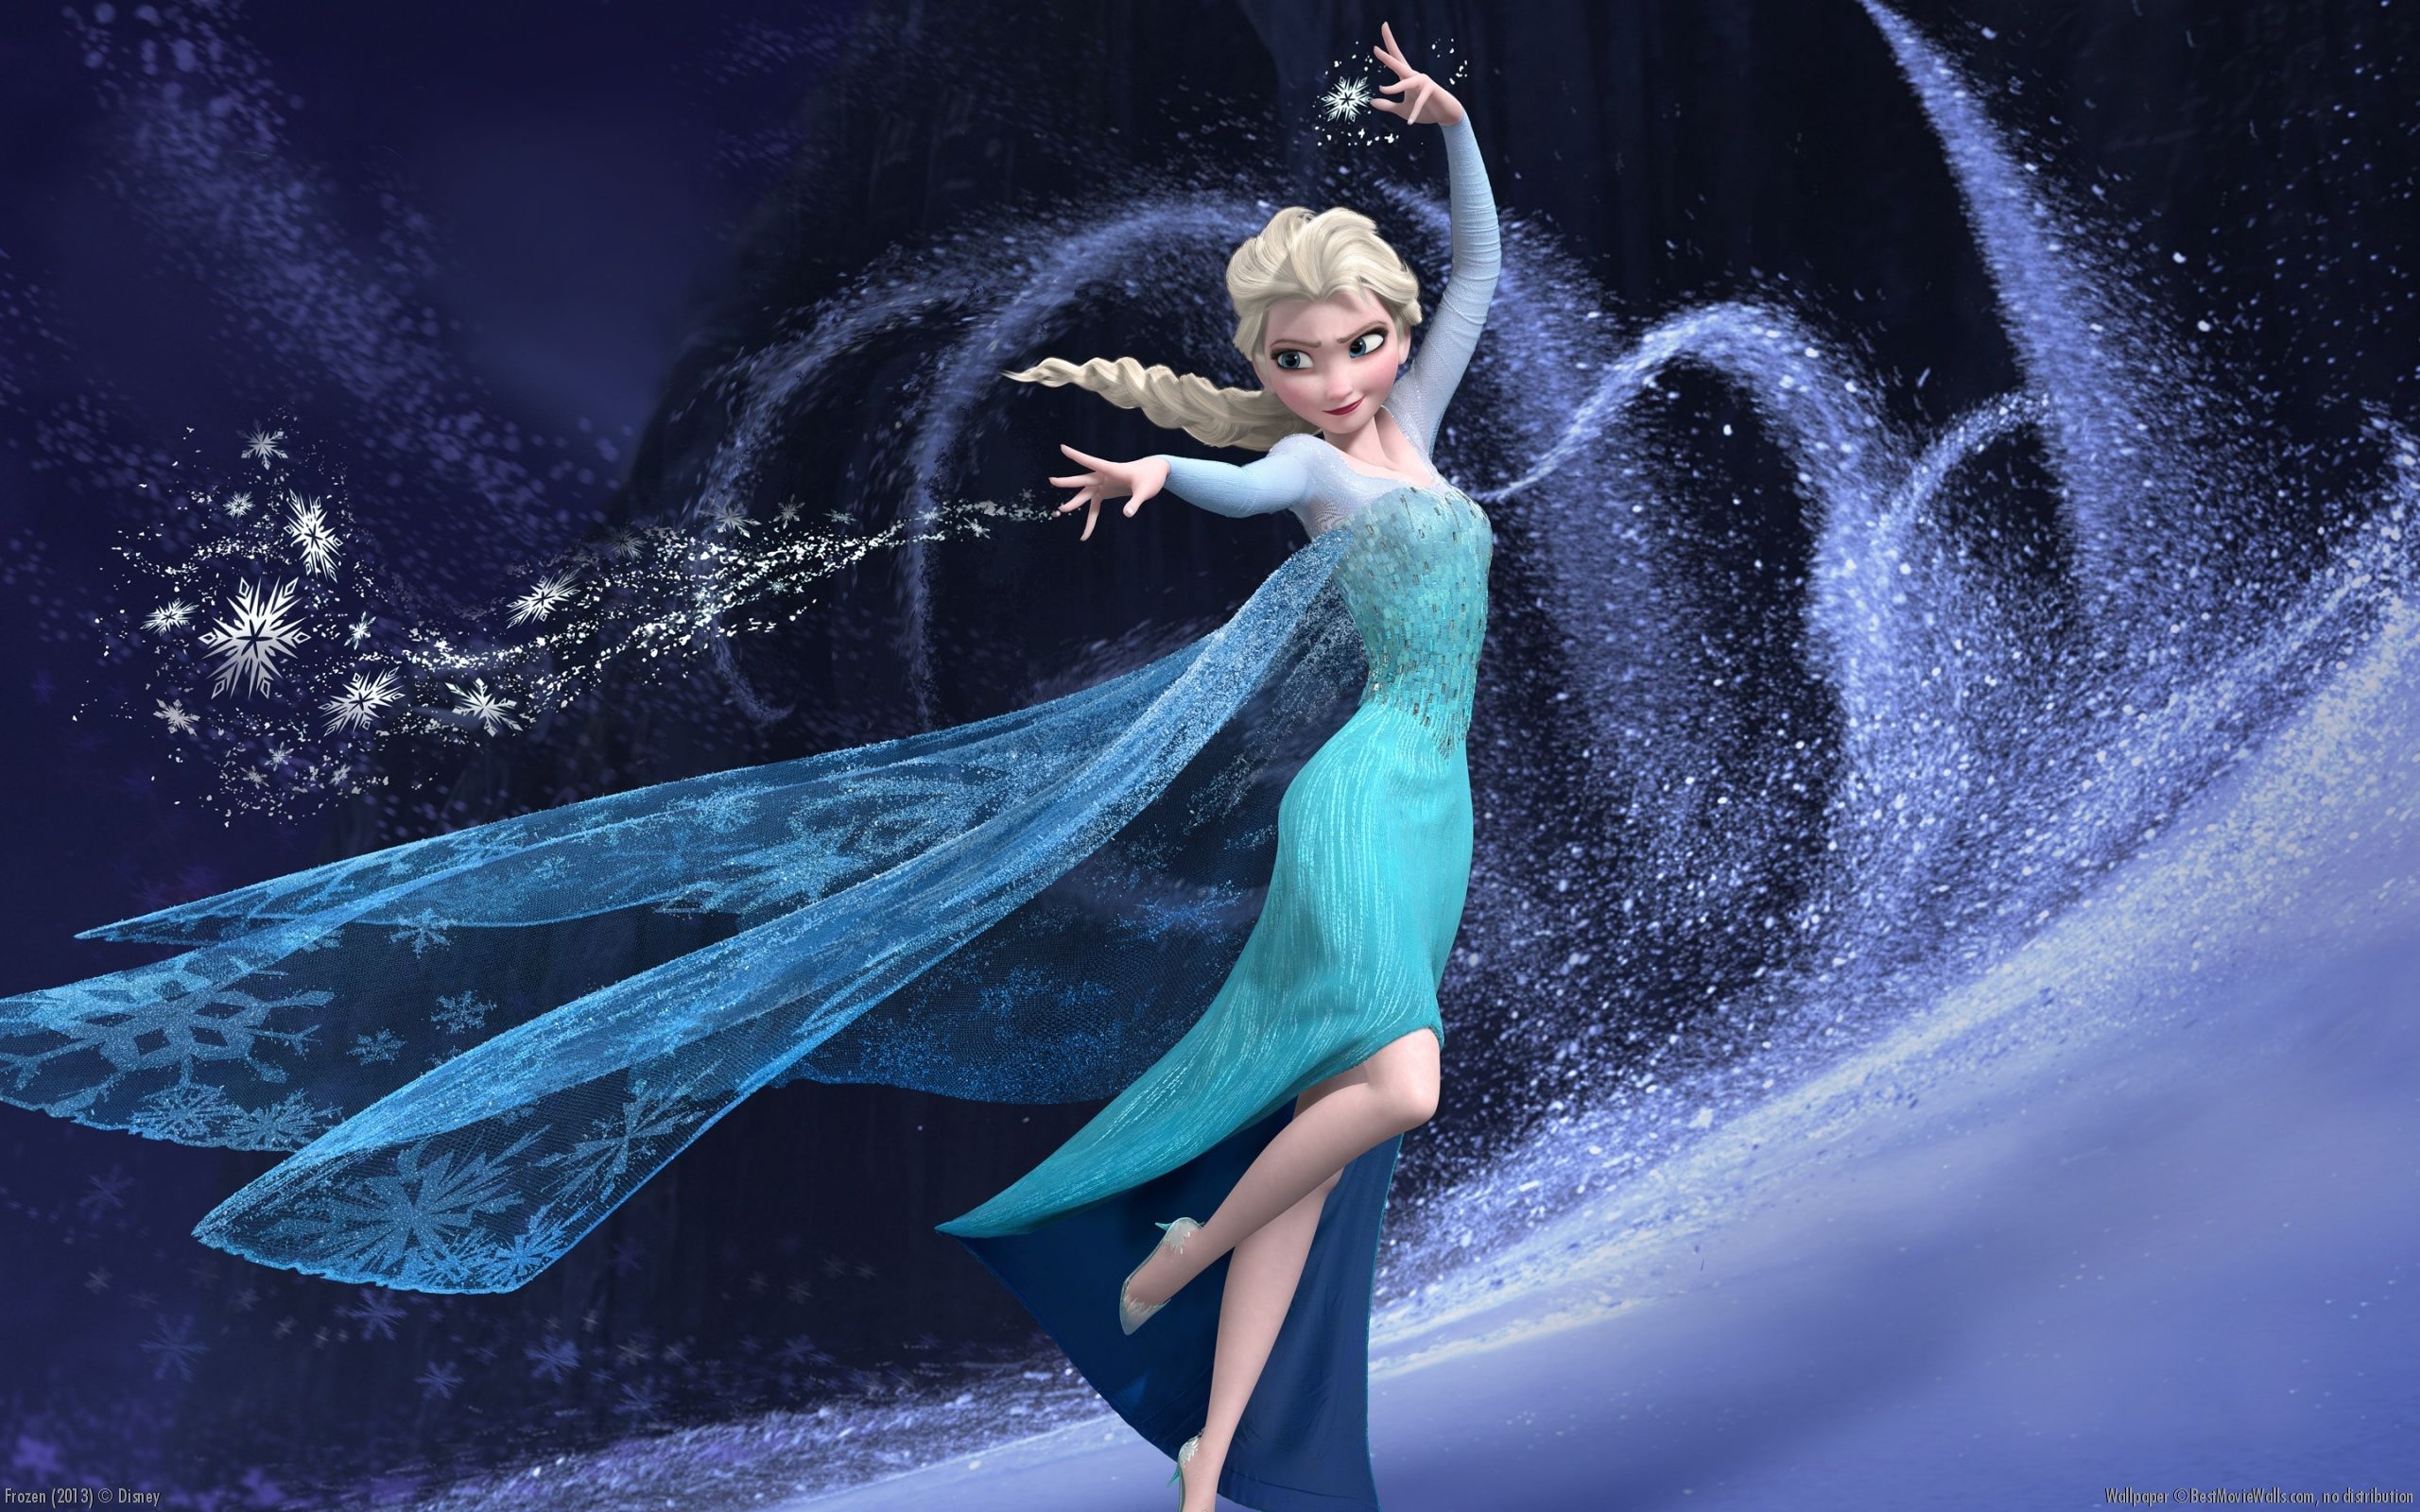 The Most Amazing & Best Frozen Wallpapers On The Web